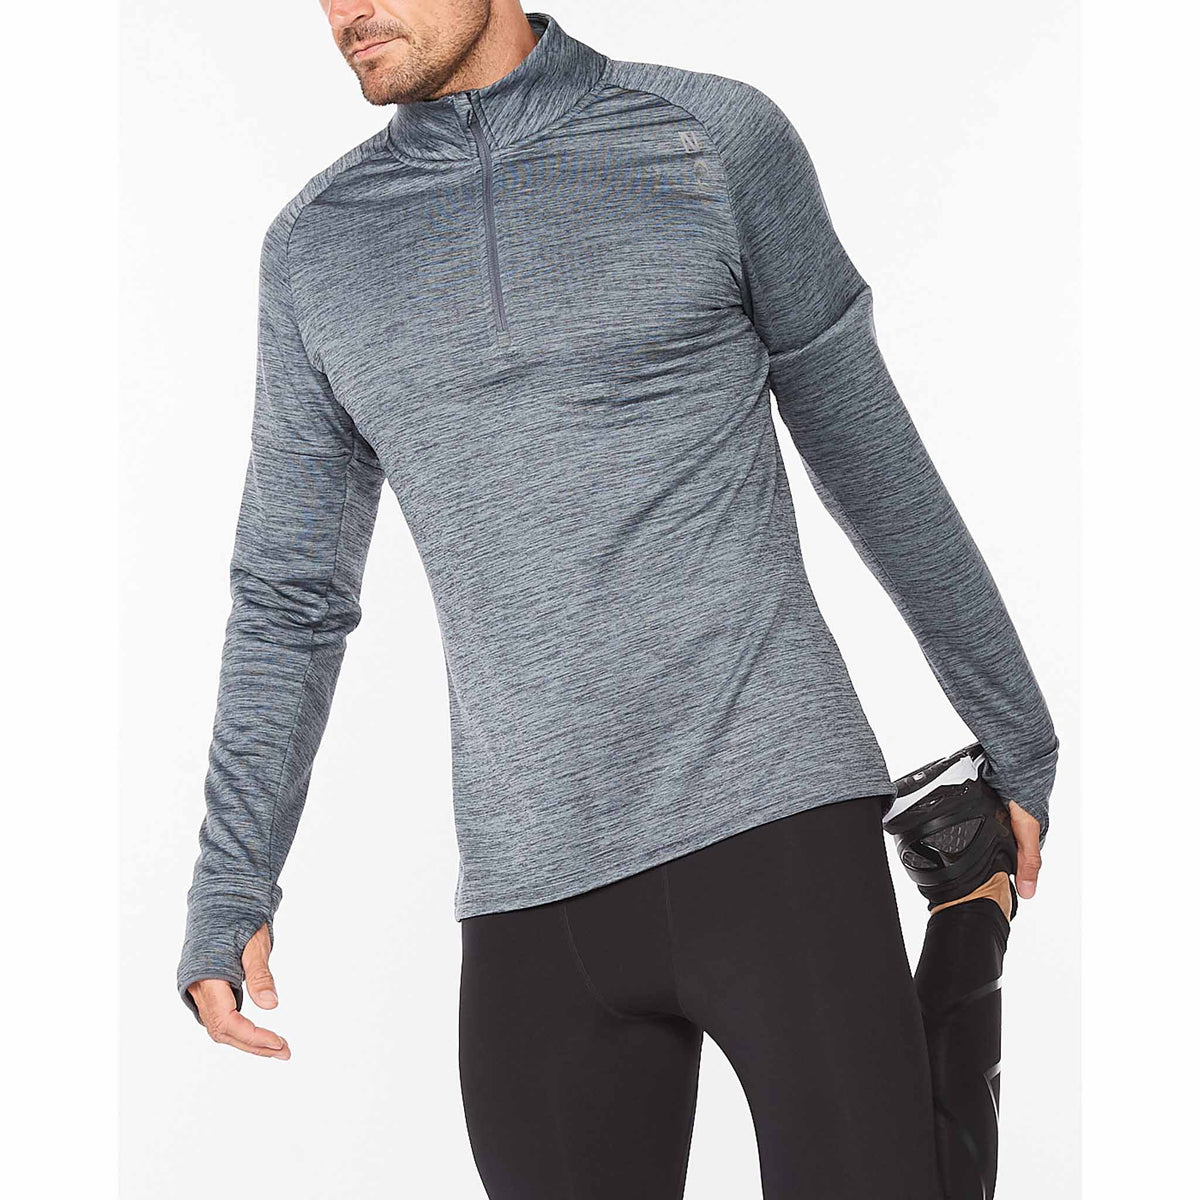 2XU Chandail manches longues Ignition 1/4 Zip pour homme angle